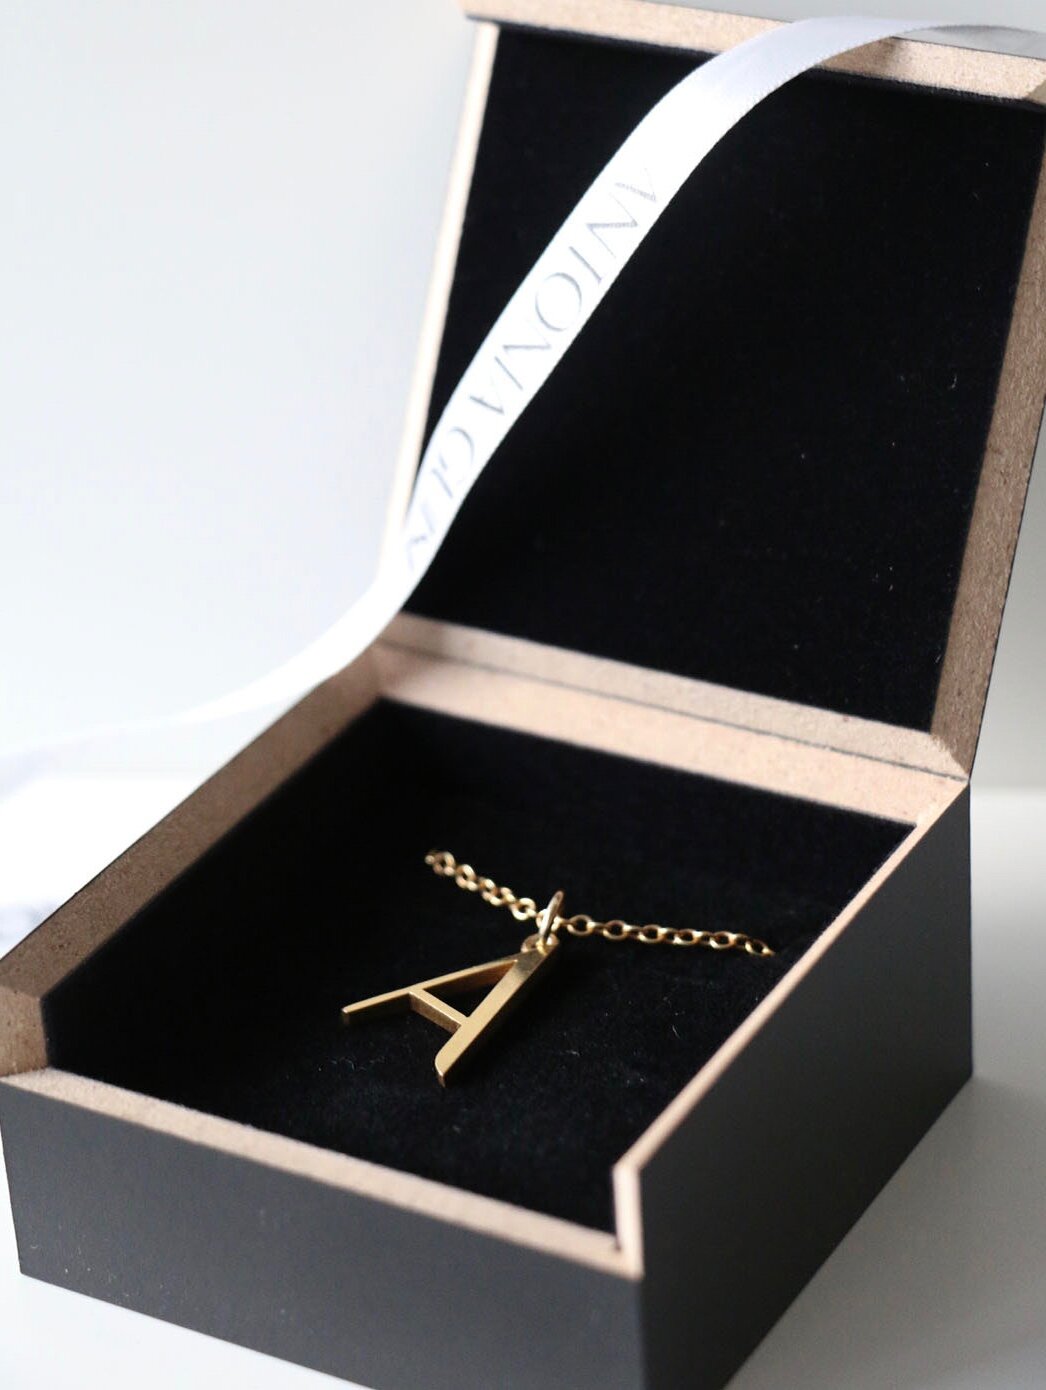 Anne Initial Necklace in our black Antonia Guise box 